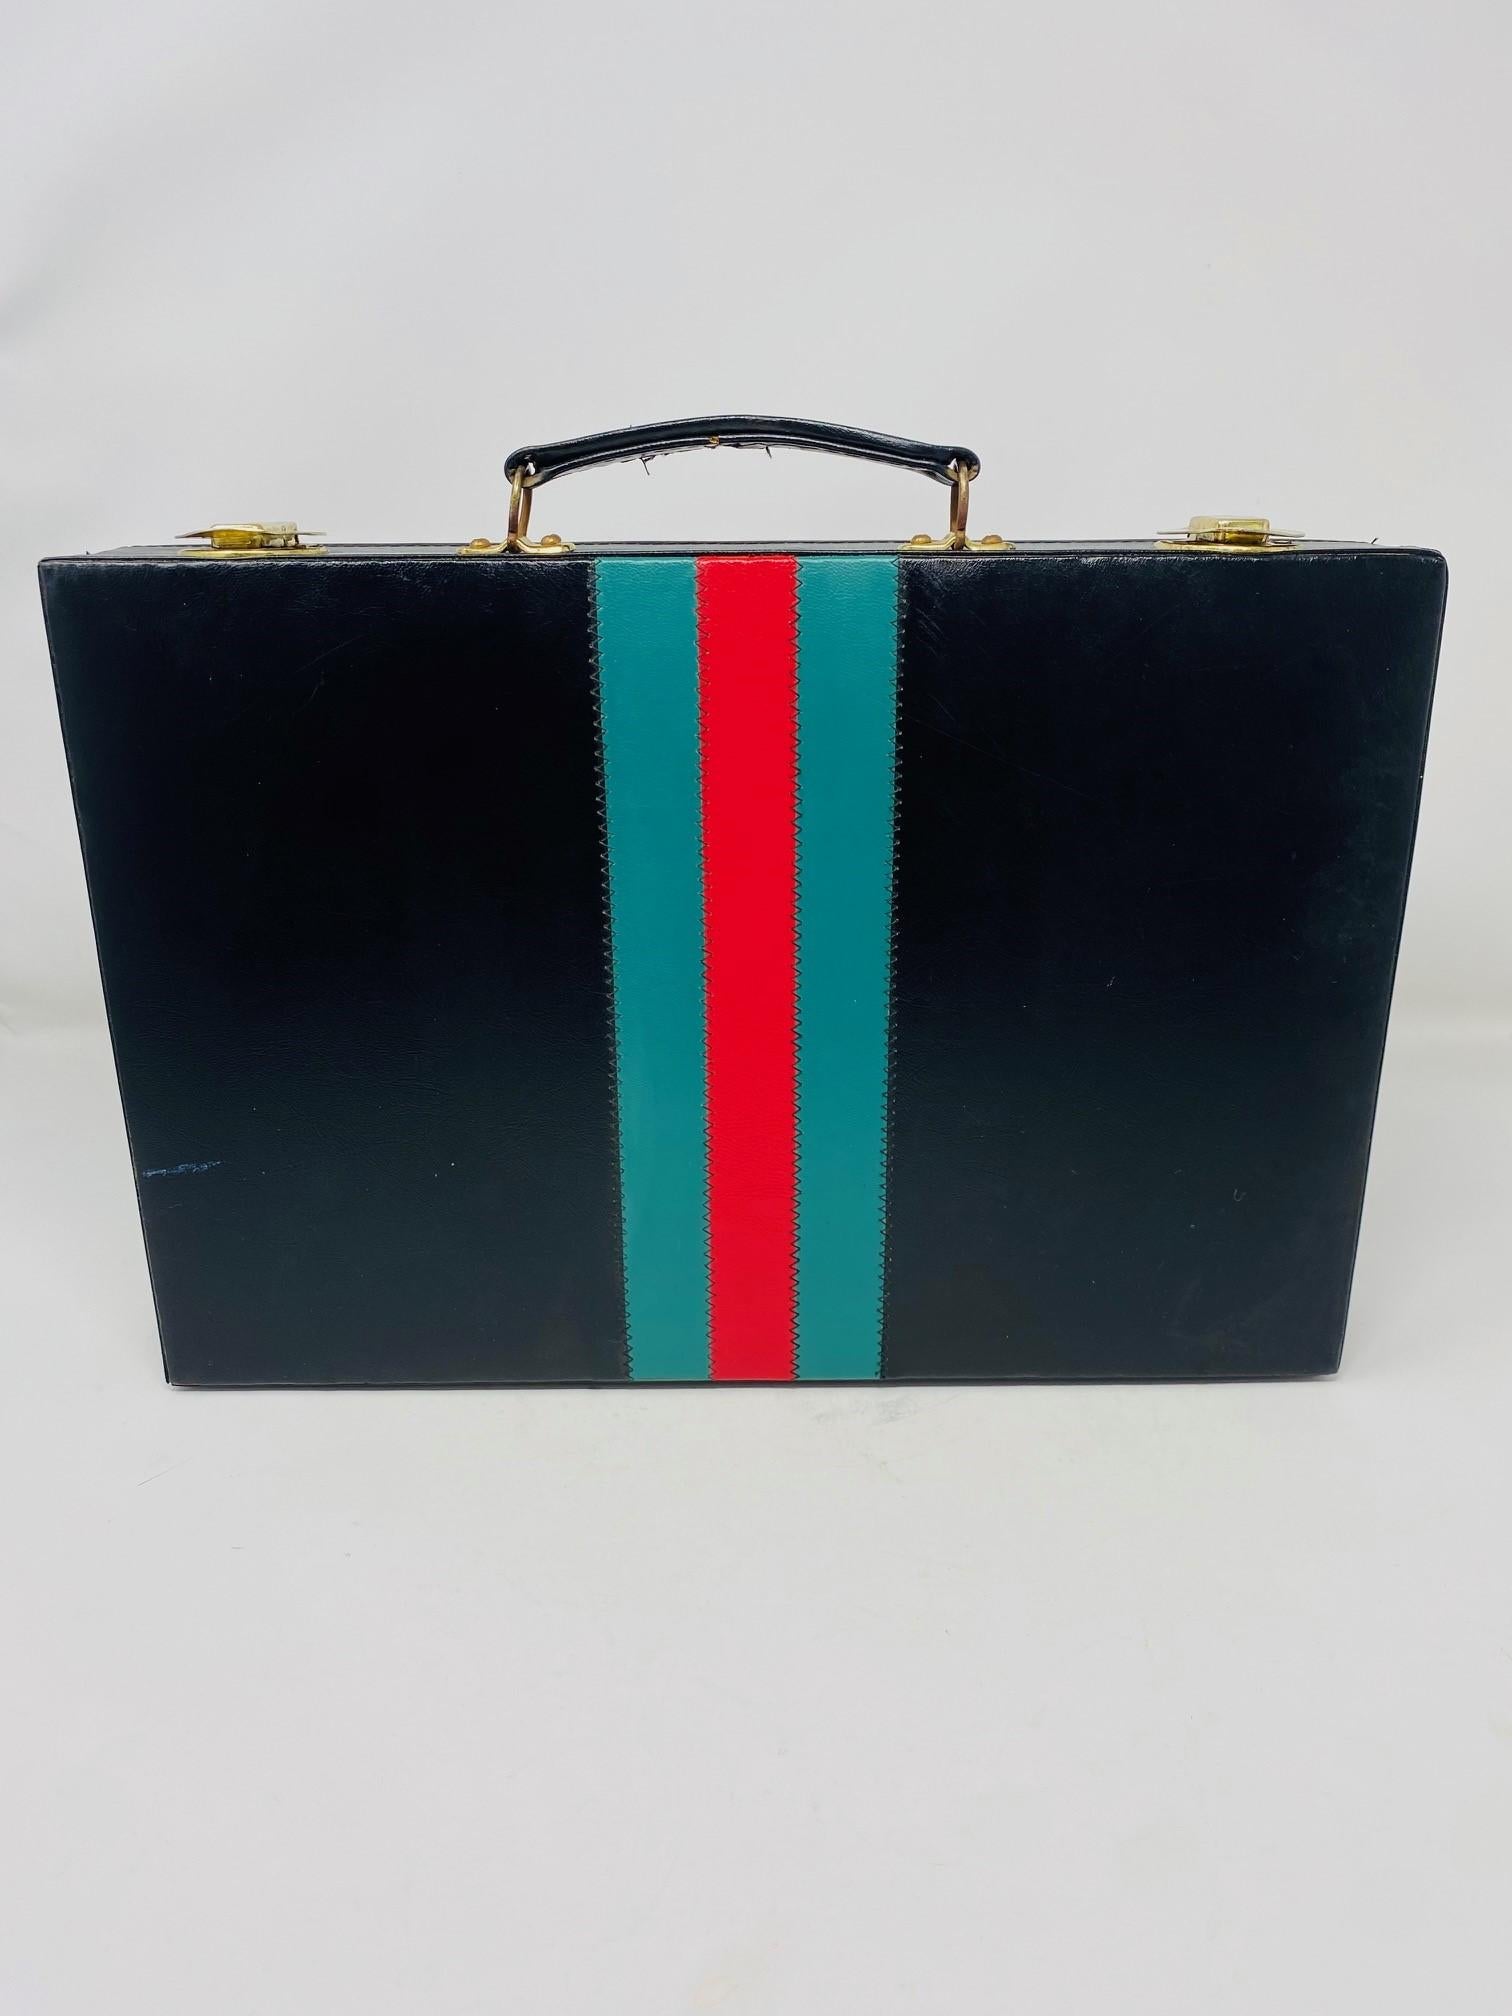 Vintage 1960s backgammon set. Enveloped in a pleather with  signature gucci style lines, this piece is reminiscent of Gucci with its designer lines and high end stance. The discreet, classic colors with distinct and interesting designer pattern in